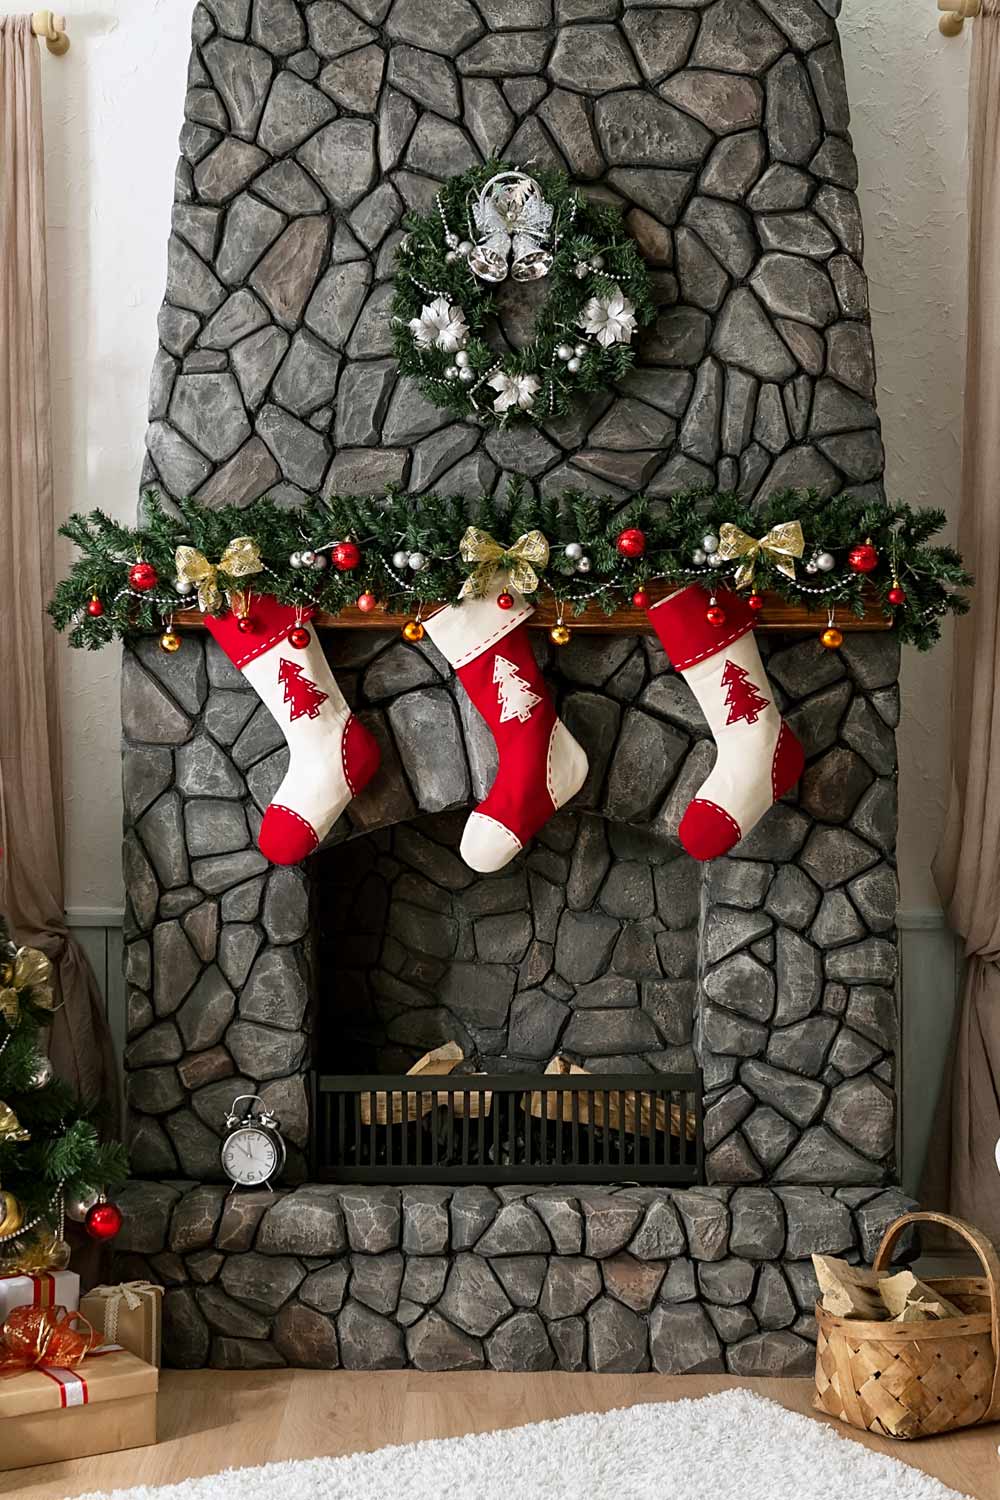 Dark Colored Fireplace Christmas Decoration